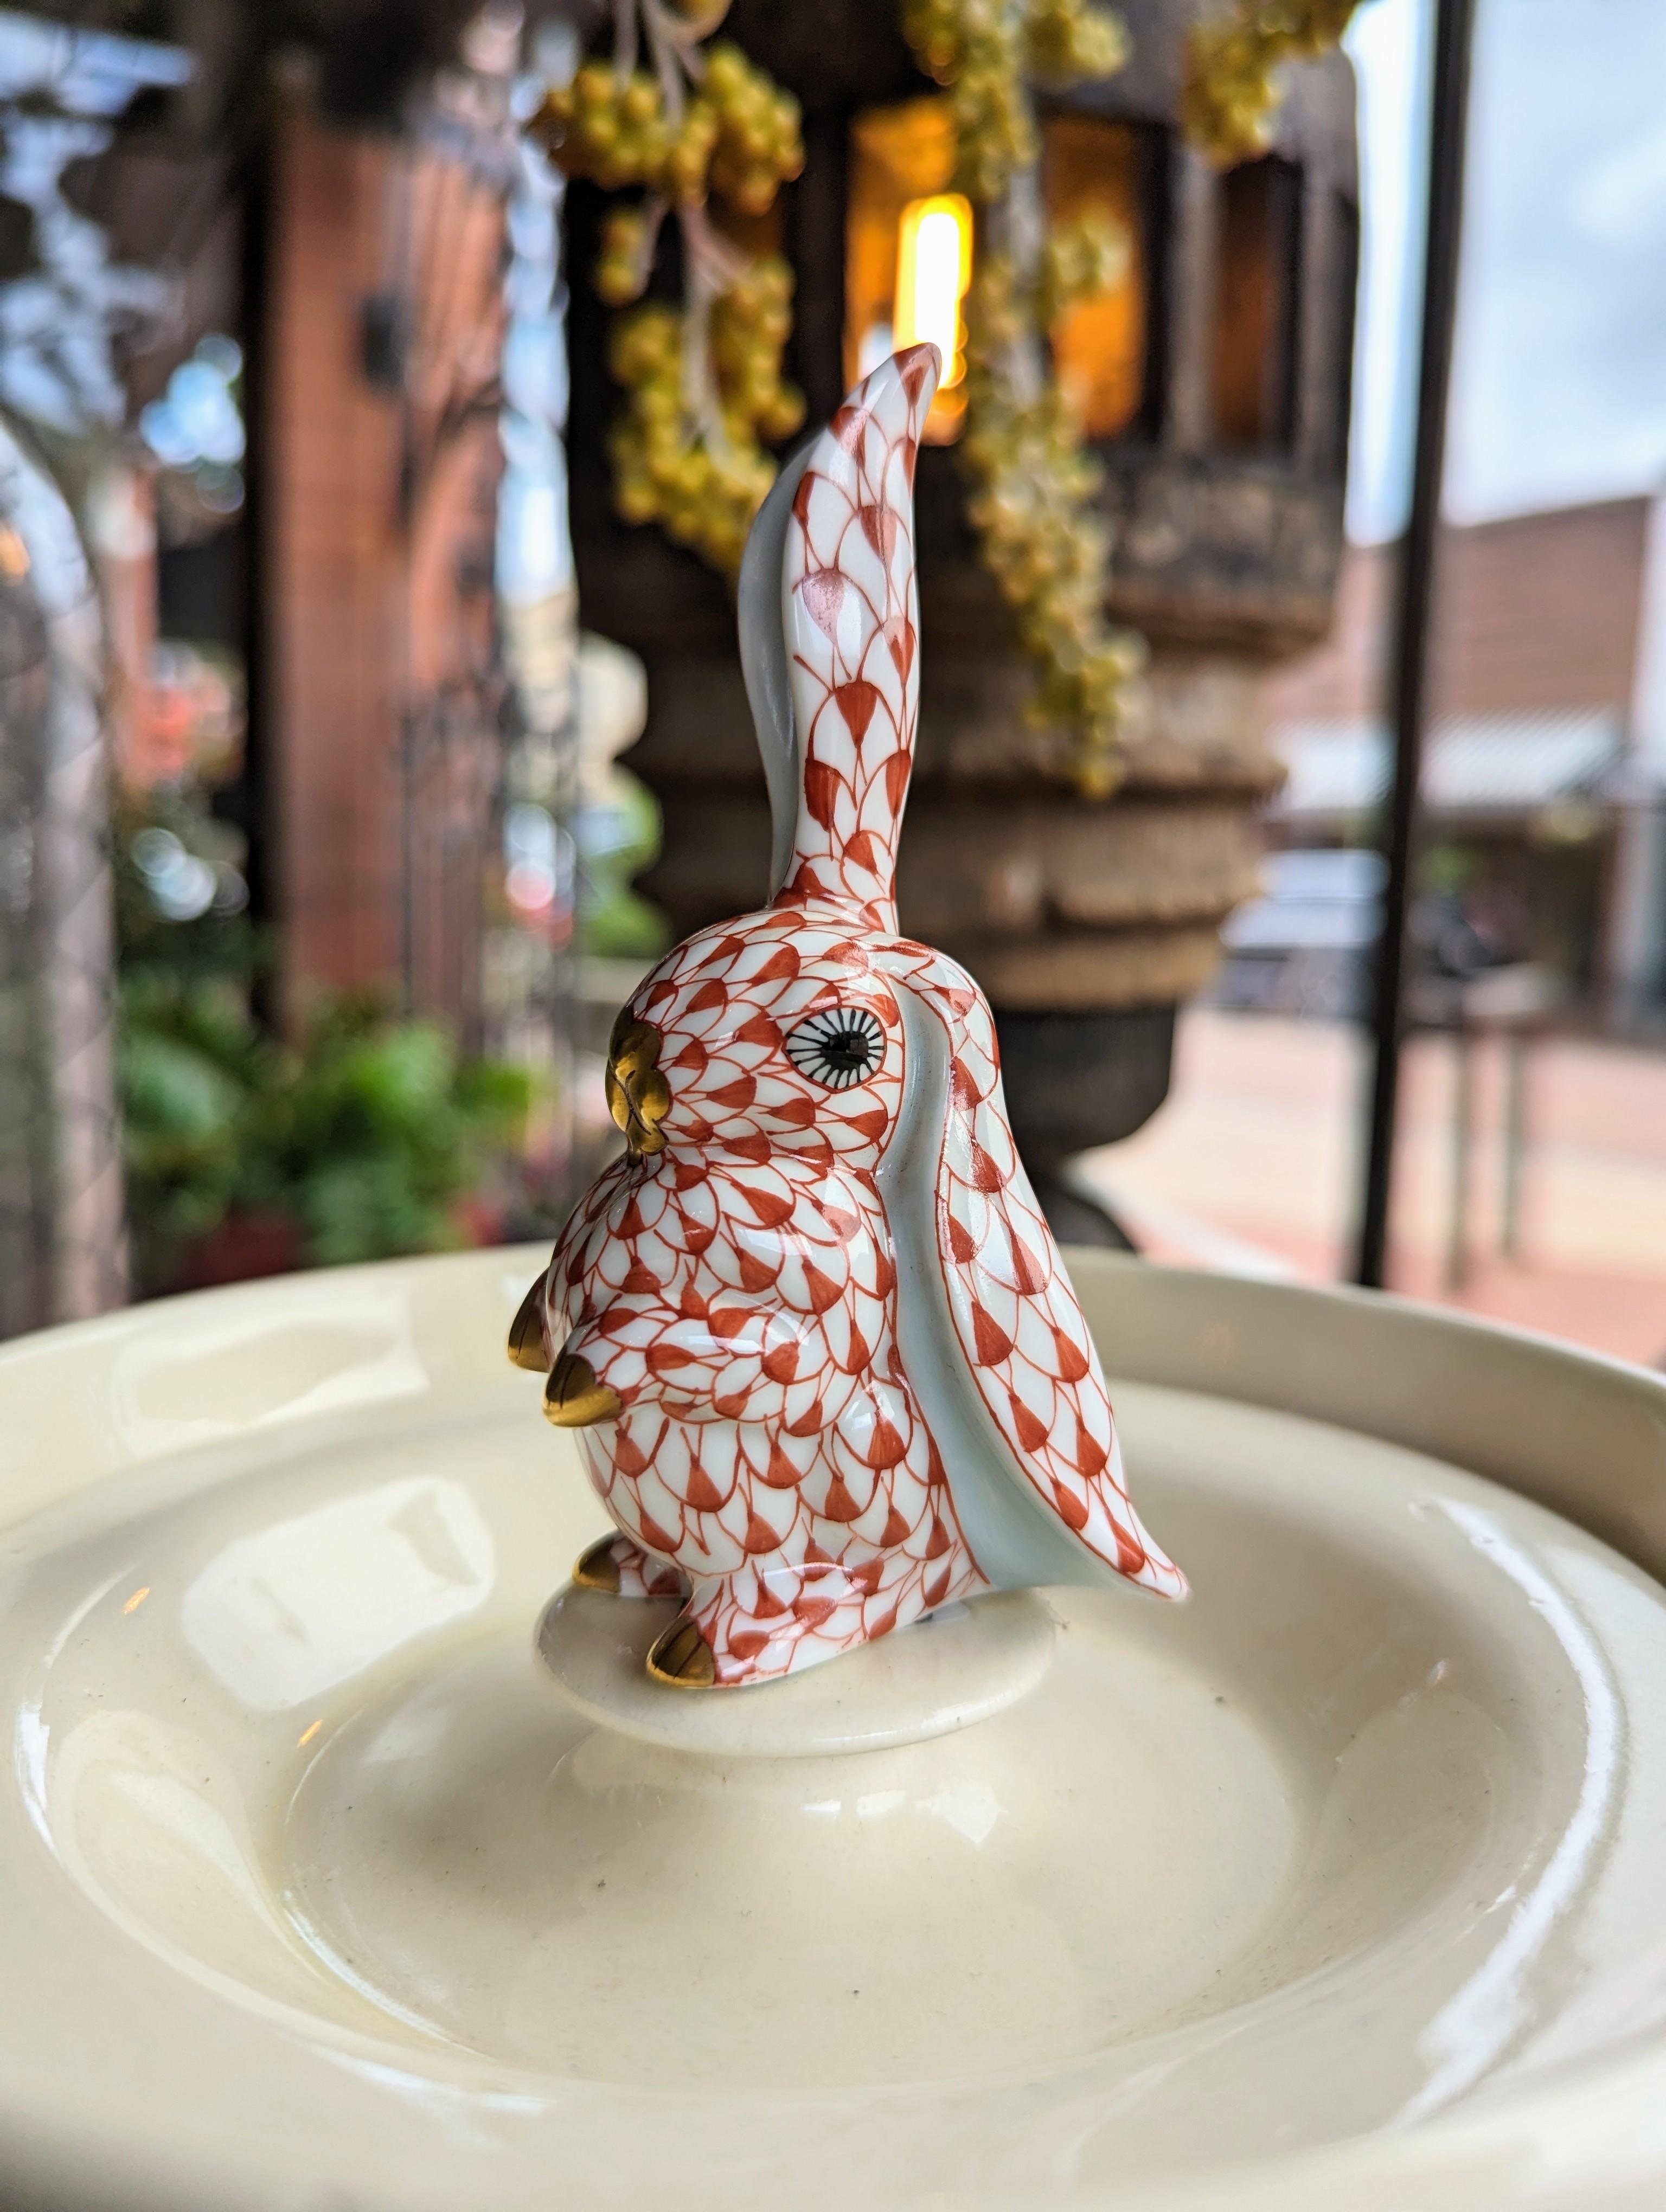 Stunning vintage Herend porcelain bunny figurine with one ear up, created in Hungary Europe with fine craftsmanship. Herend Porcelain Manufactory (created in 1826) has been making a variety of porcelain sets with the highest of quality. All